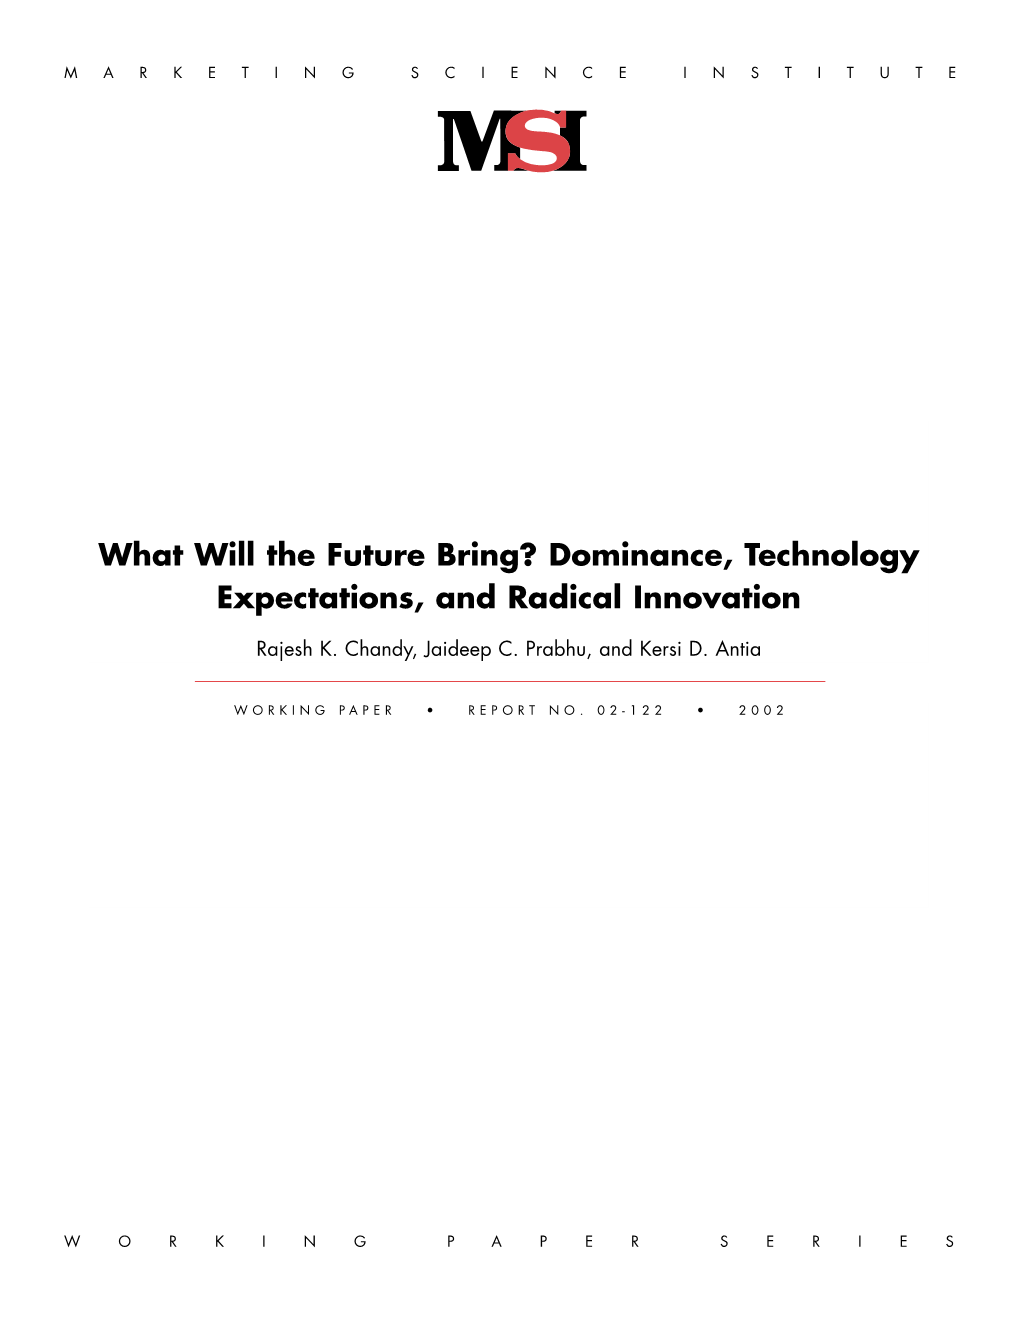 Dominance, Technology Expectations, and Radical Innovation